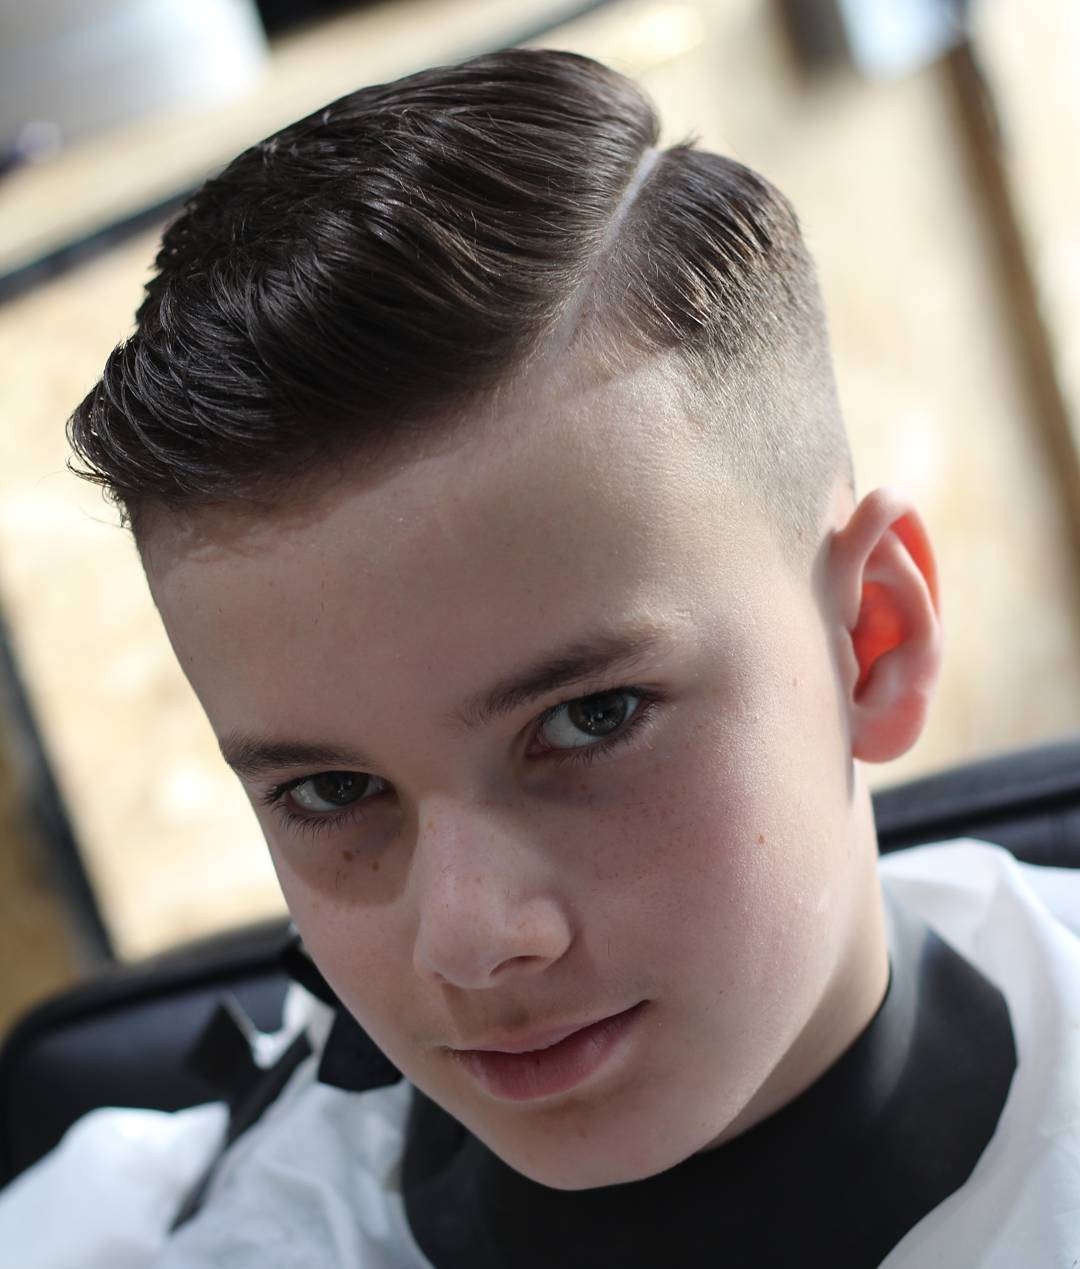 Cool Boy Hairstyles
 50 Best Hairstyles for Teenage Boys The Ultimate Guide 2019